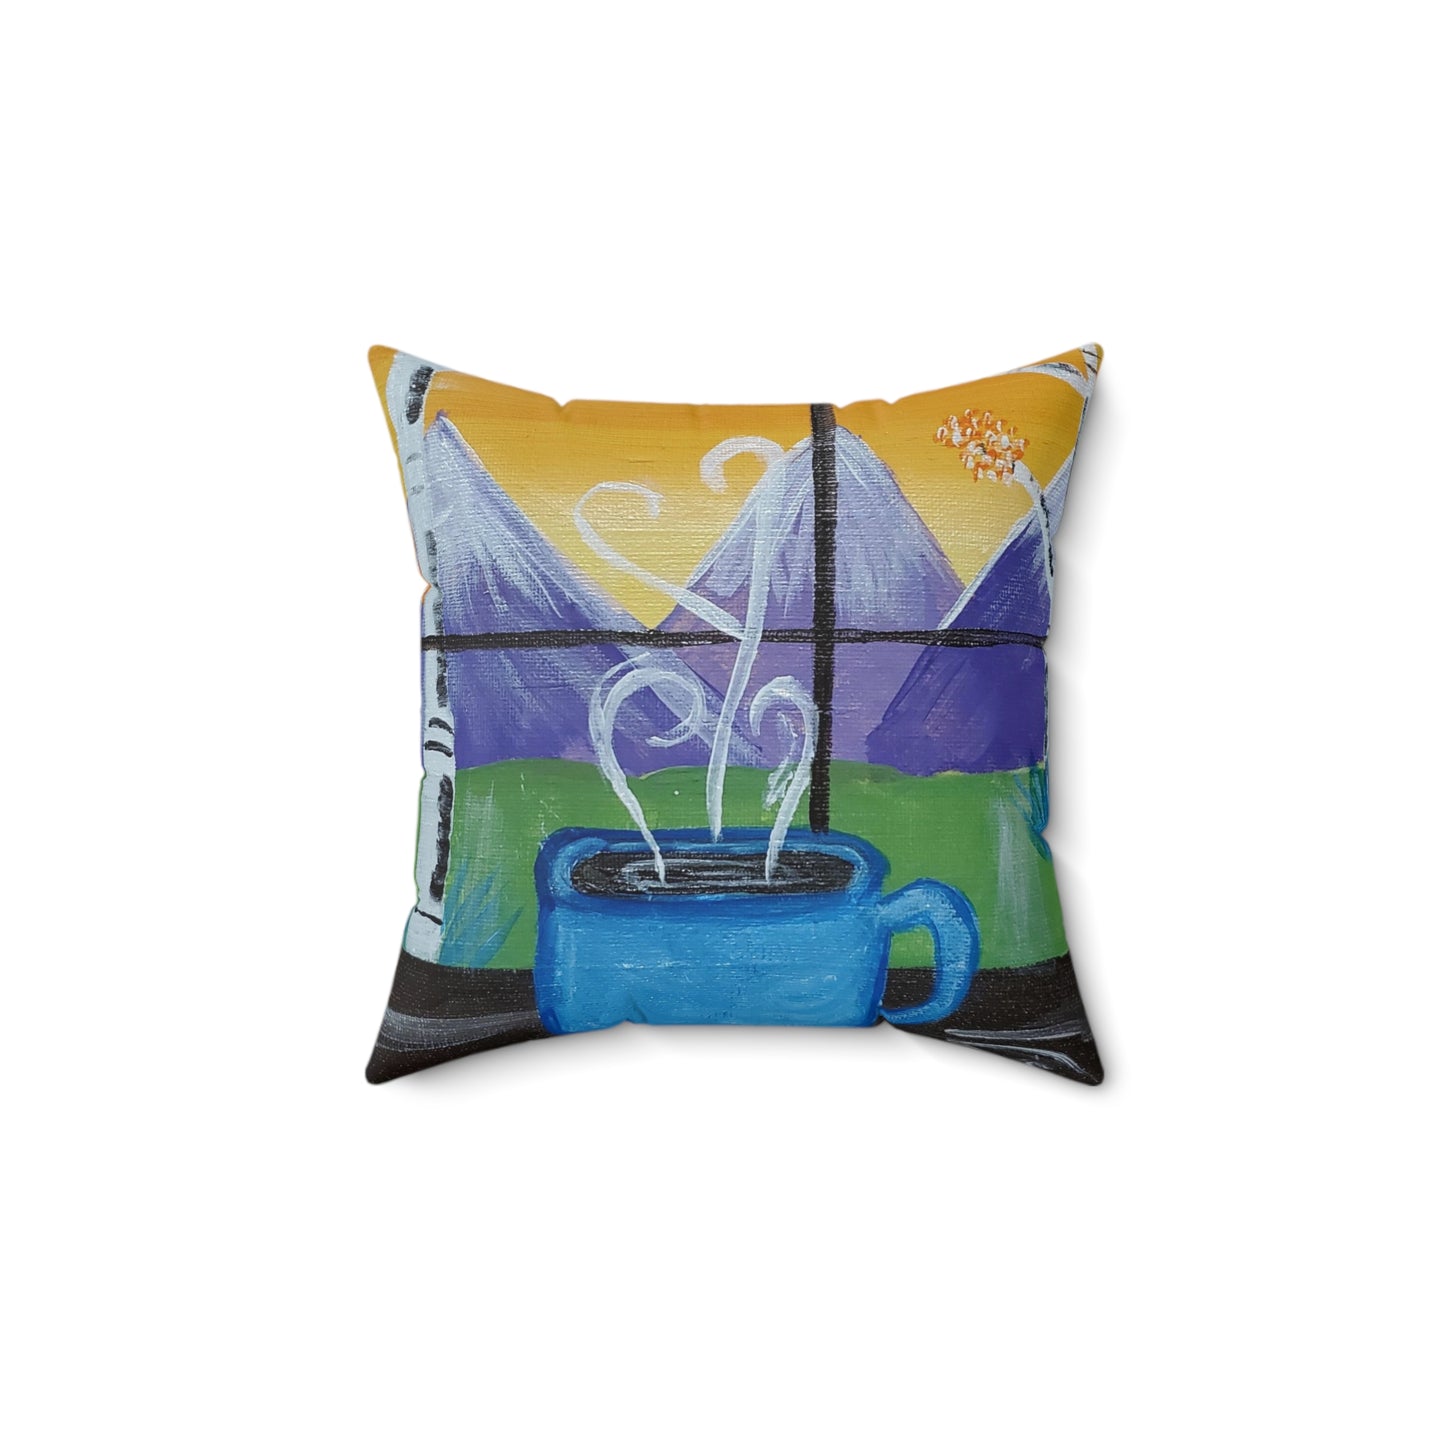 The Window Spun Polyester Square Pillow (Brookson Collection)